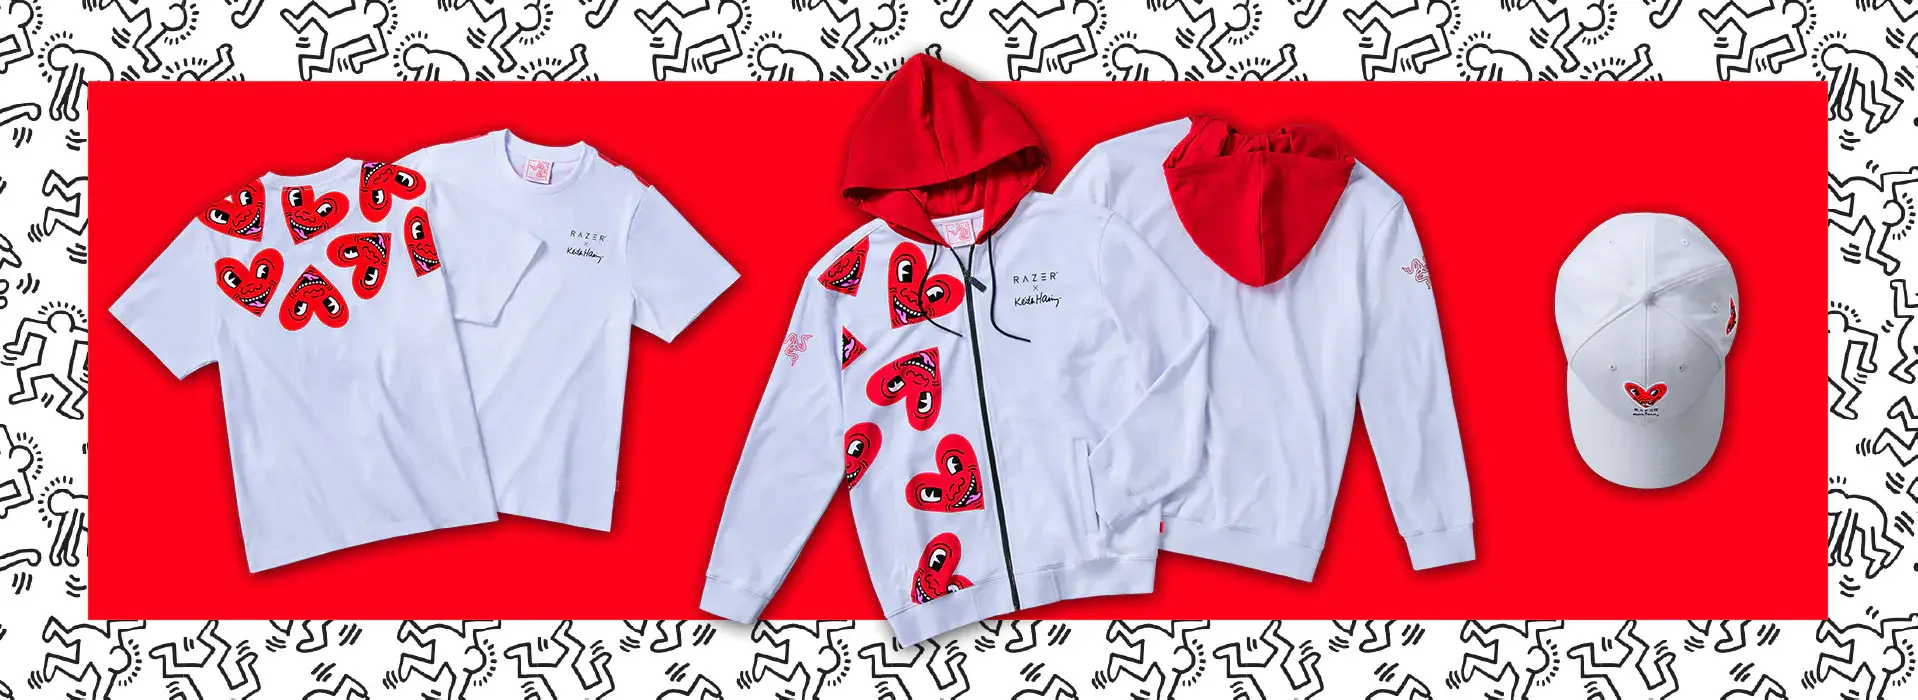 Razer x Keith Haring Inspired Collection